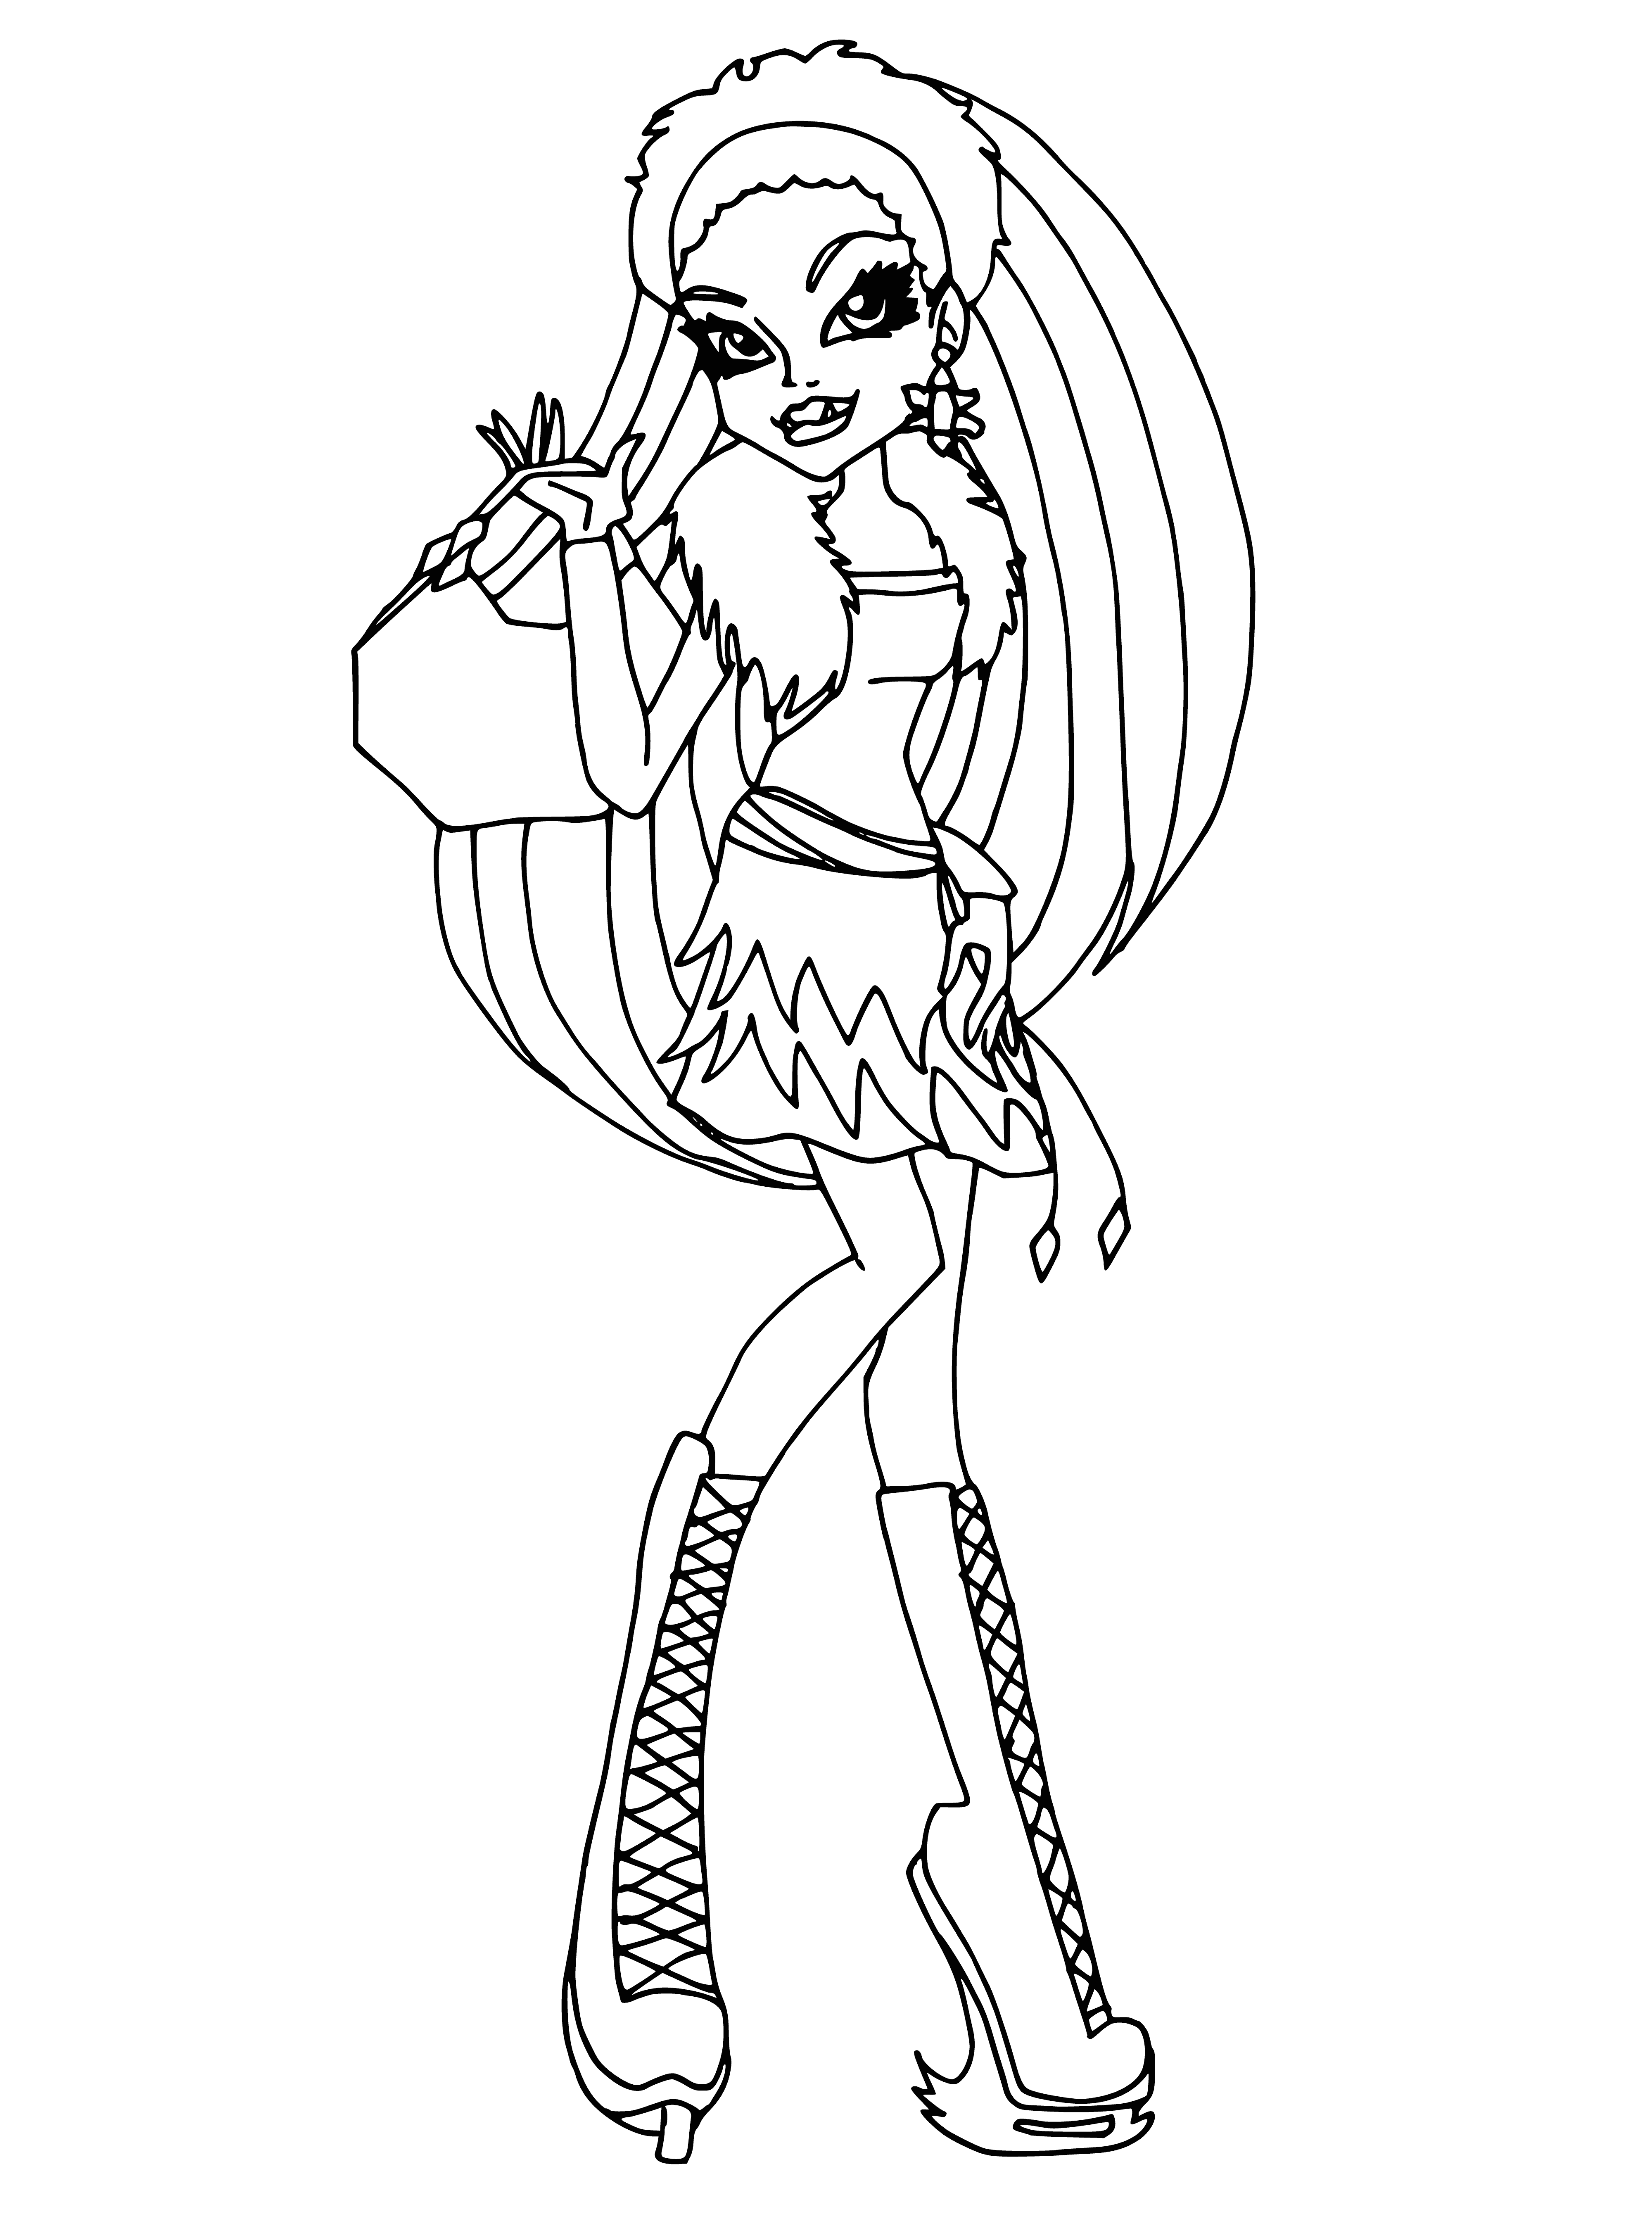 coloring page: Abby Bominable (10) is a Monster High student & daughter of the Abominable Snowman, inspired by Yeti folklore.